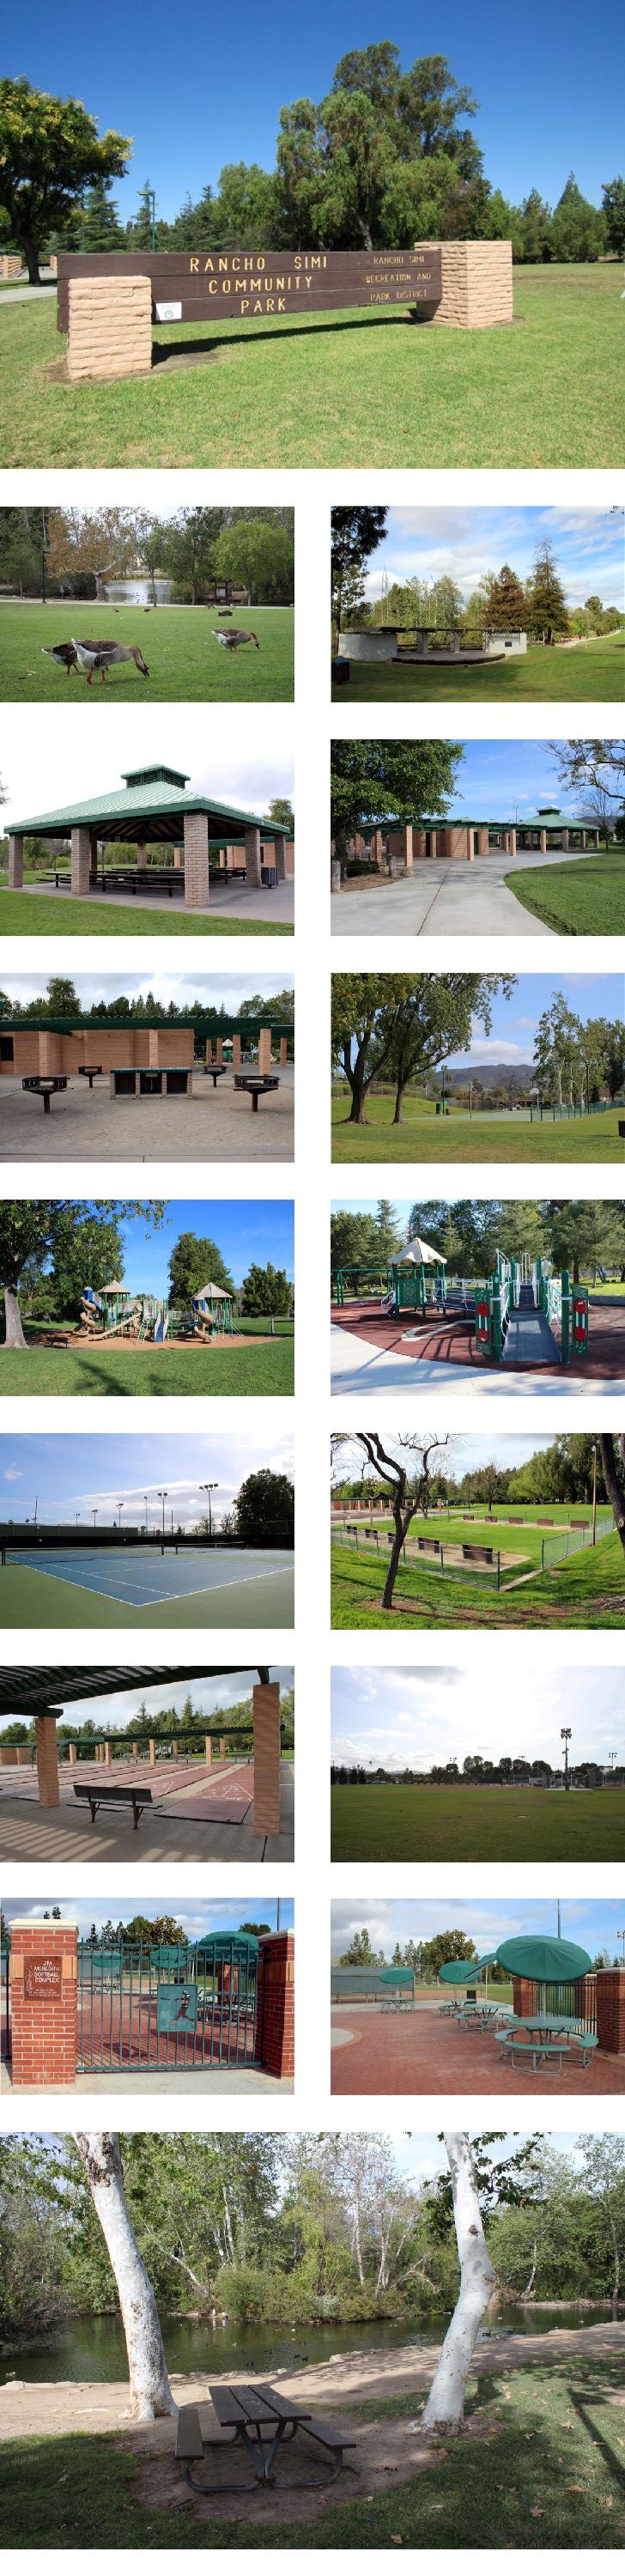 Rancho Simi Comm Park Collage